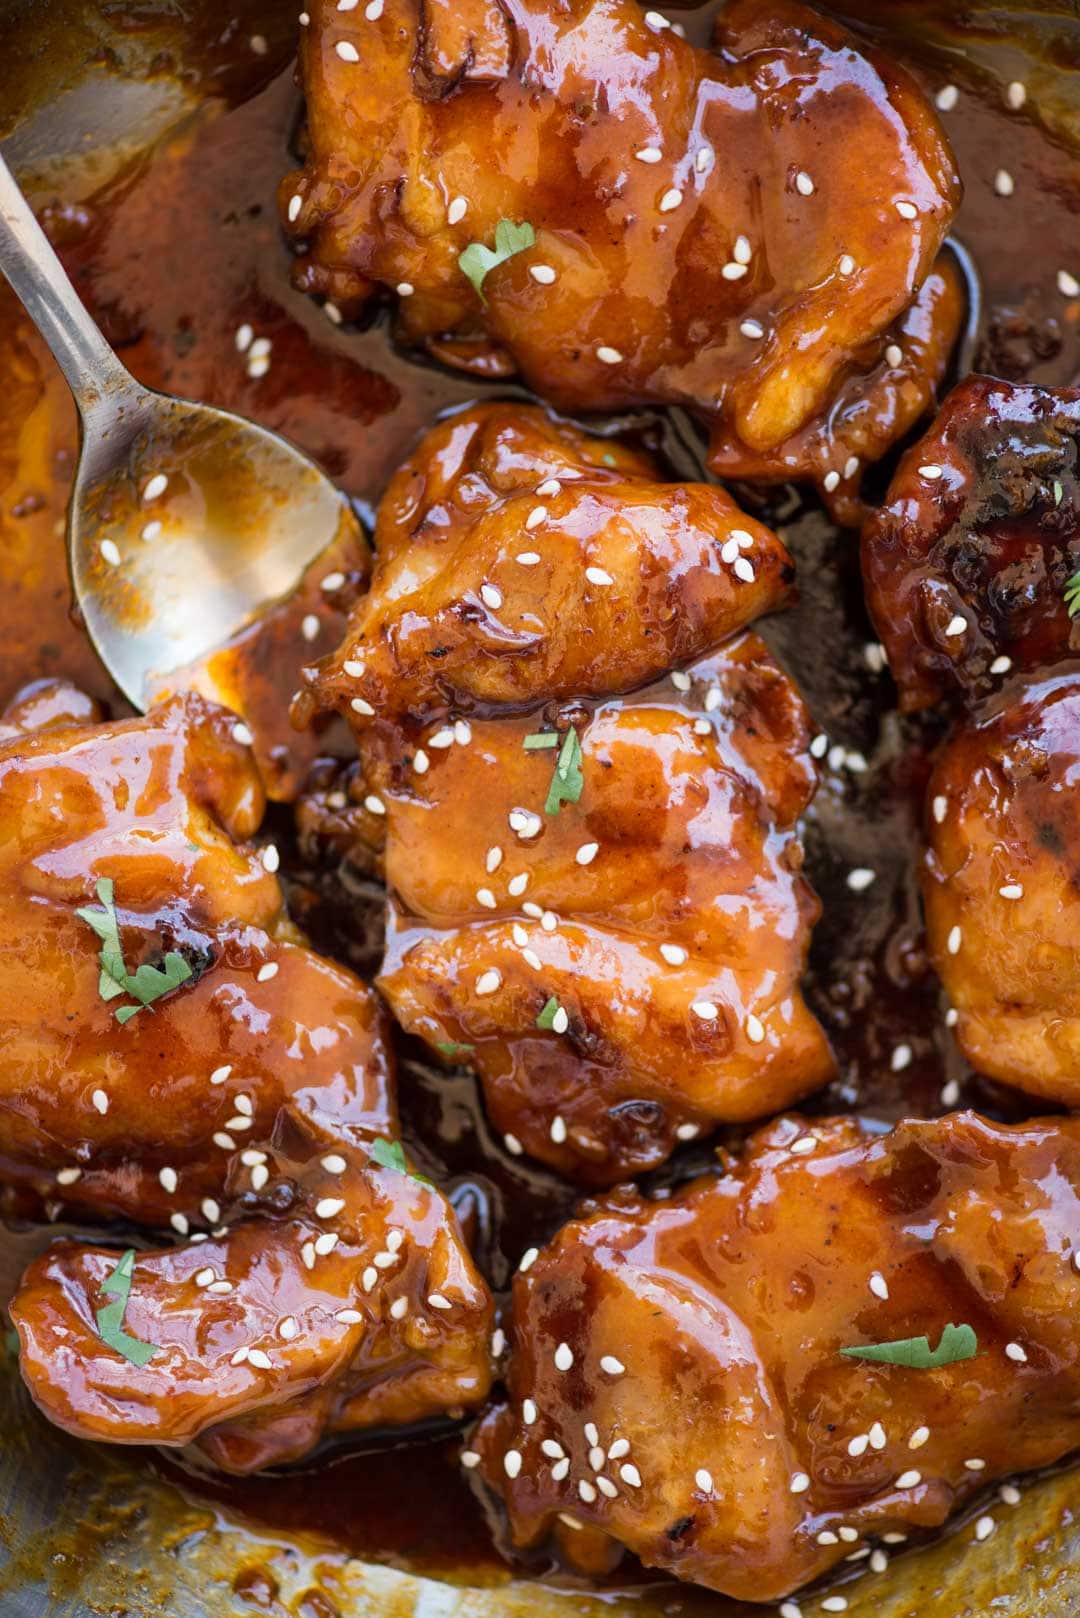 Honey Sriracha Chicken has Juicy chicken thighs in an incredibly delicious sticky, sweet and spicy Honey Sriracha sauce. You need less than 20 minutes to make this recipe with basic pantry ingredients.  